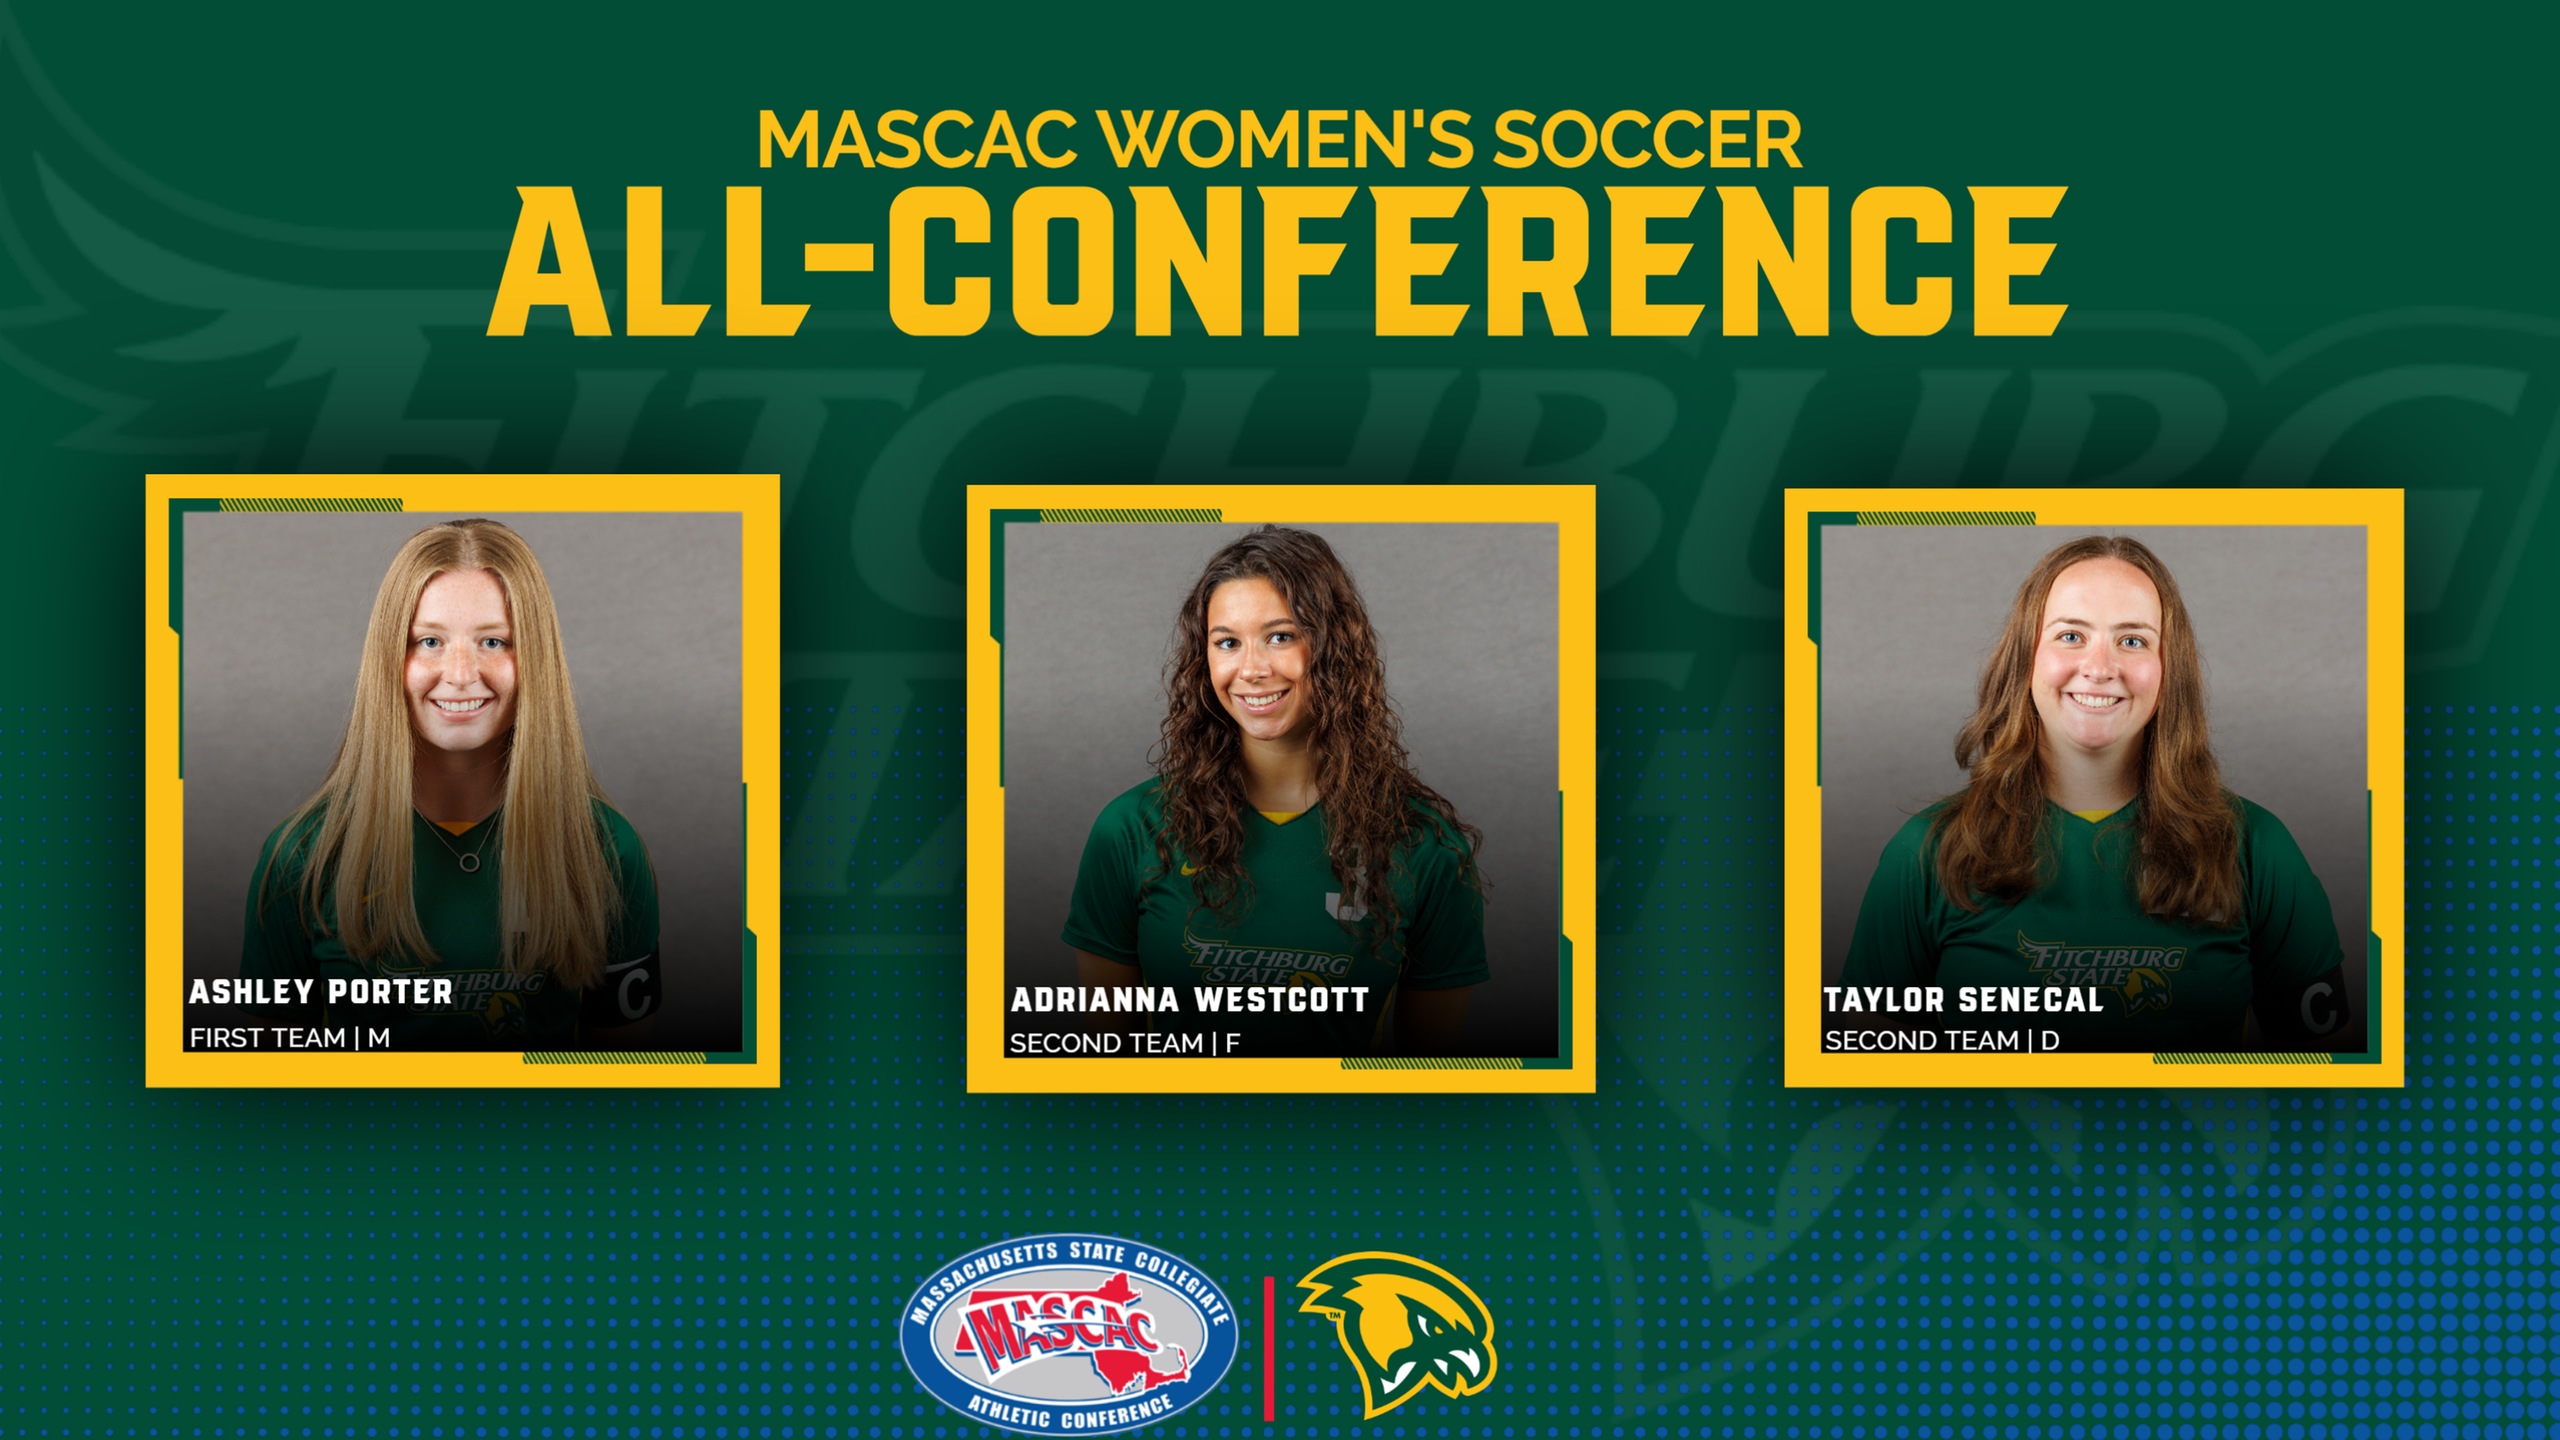 MASCAC Releases All-Conference Teams for Women's Soccer